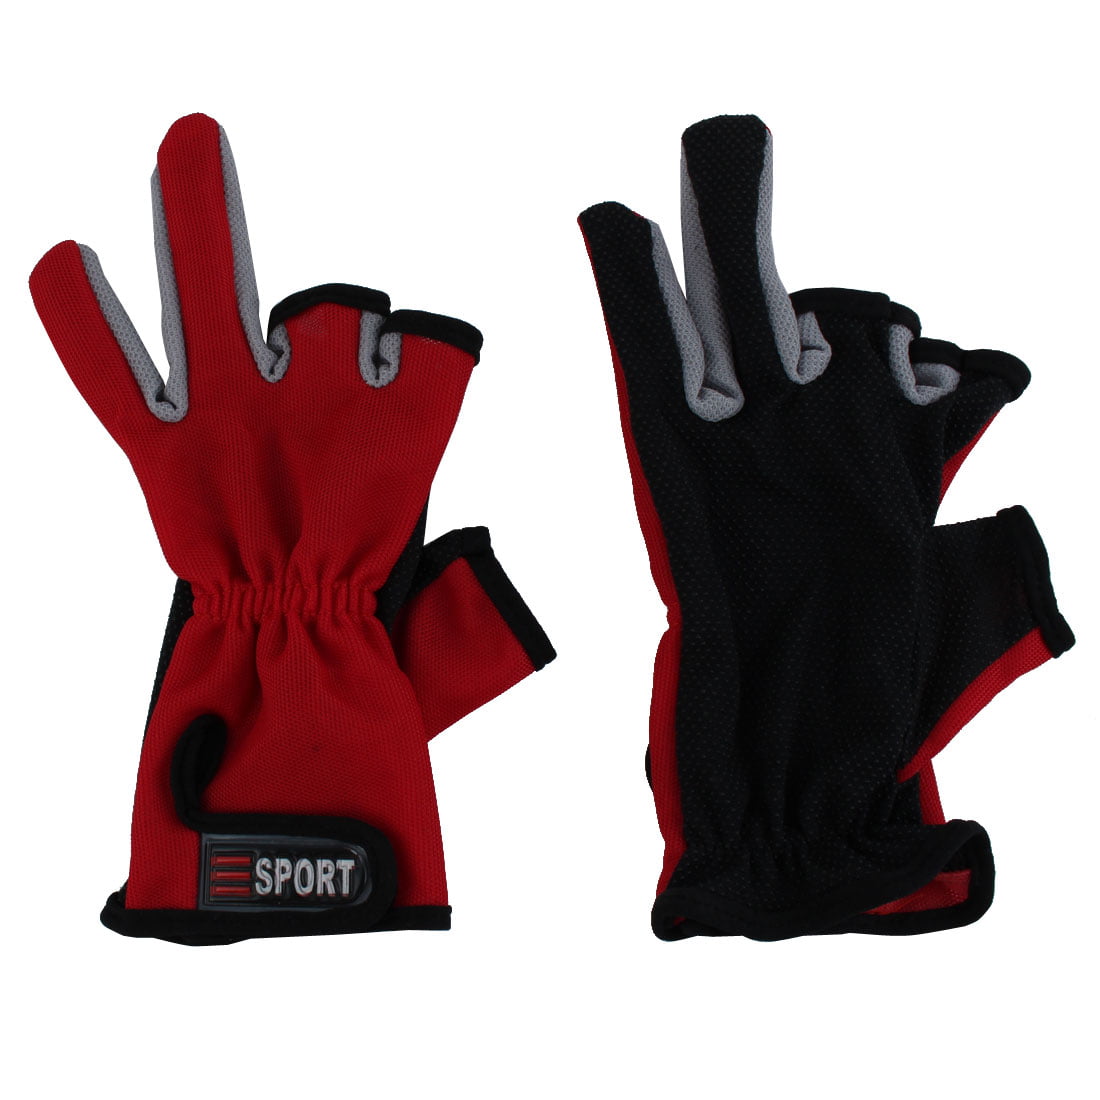 Fishing Gloves for Men Protective 3-Cut Fingers Anti-slip Outdoor Camping 